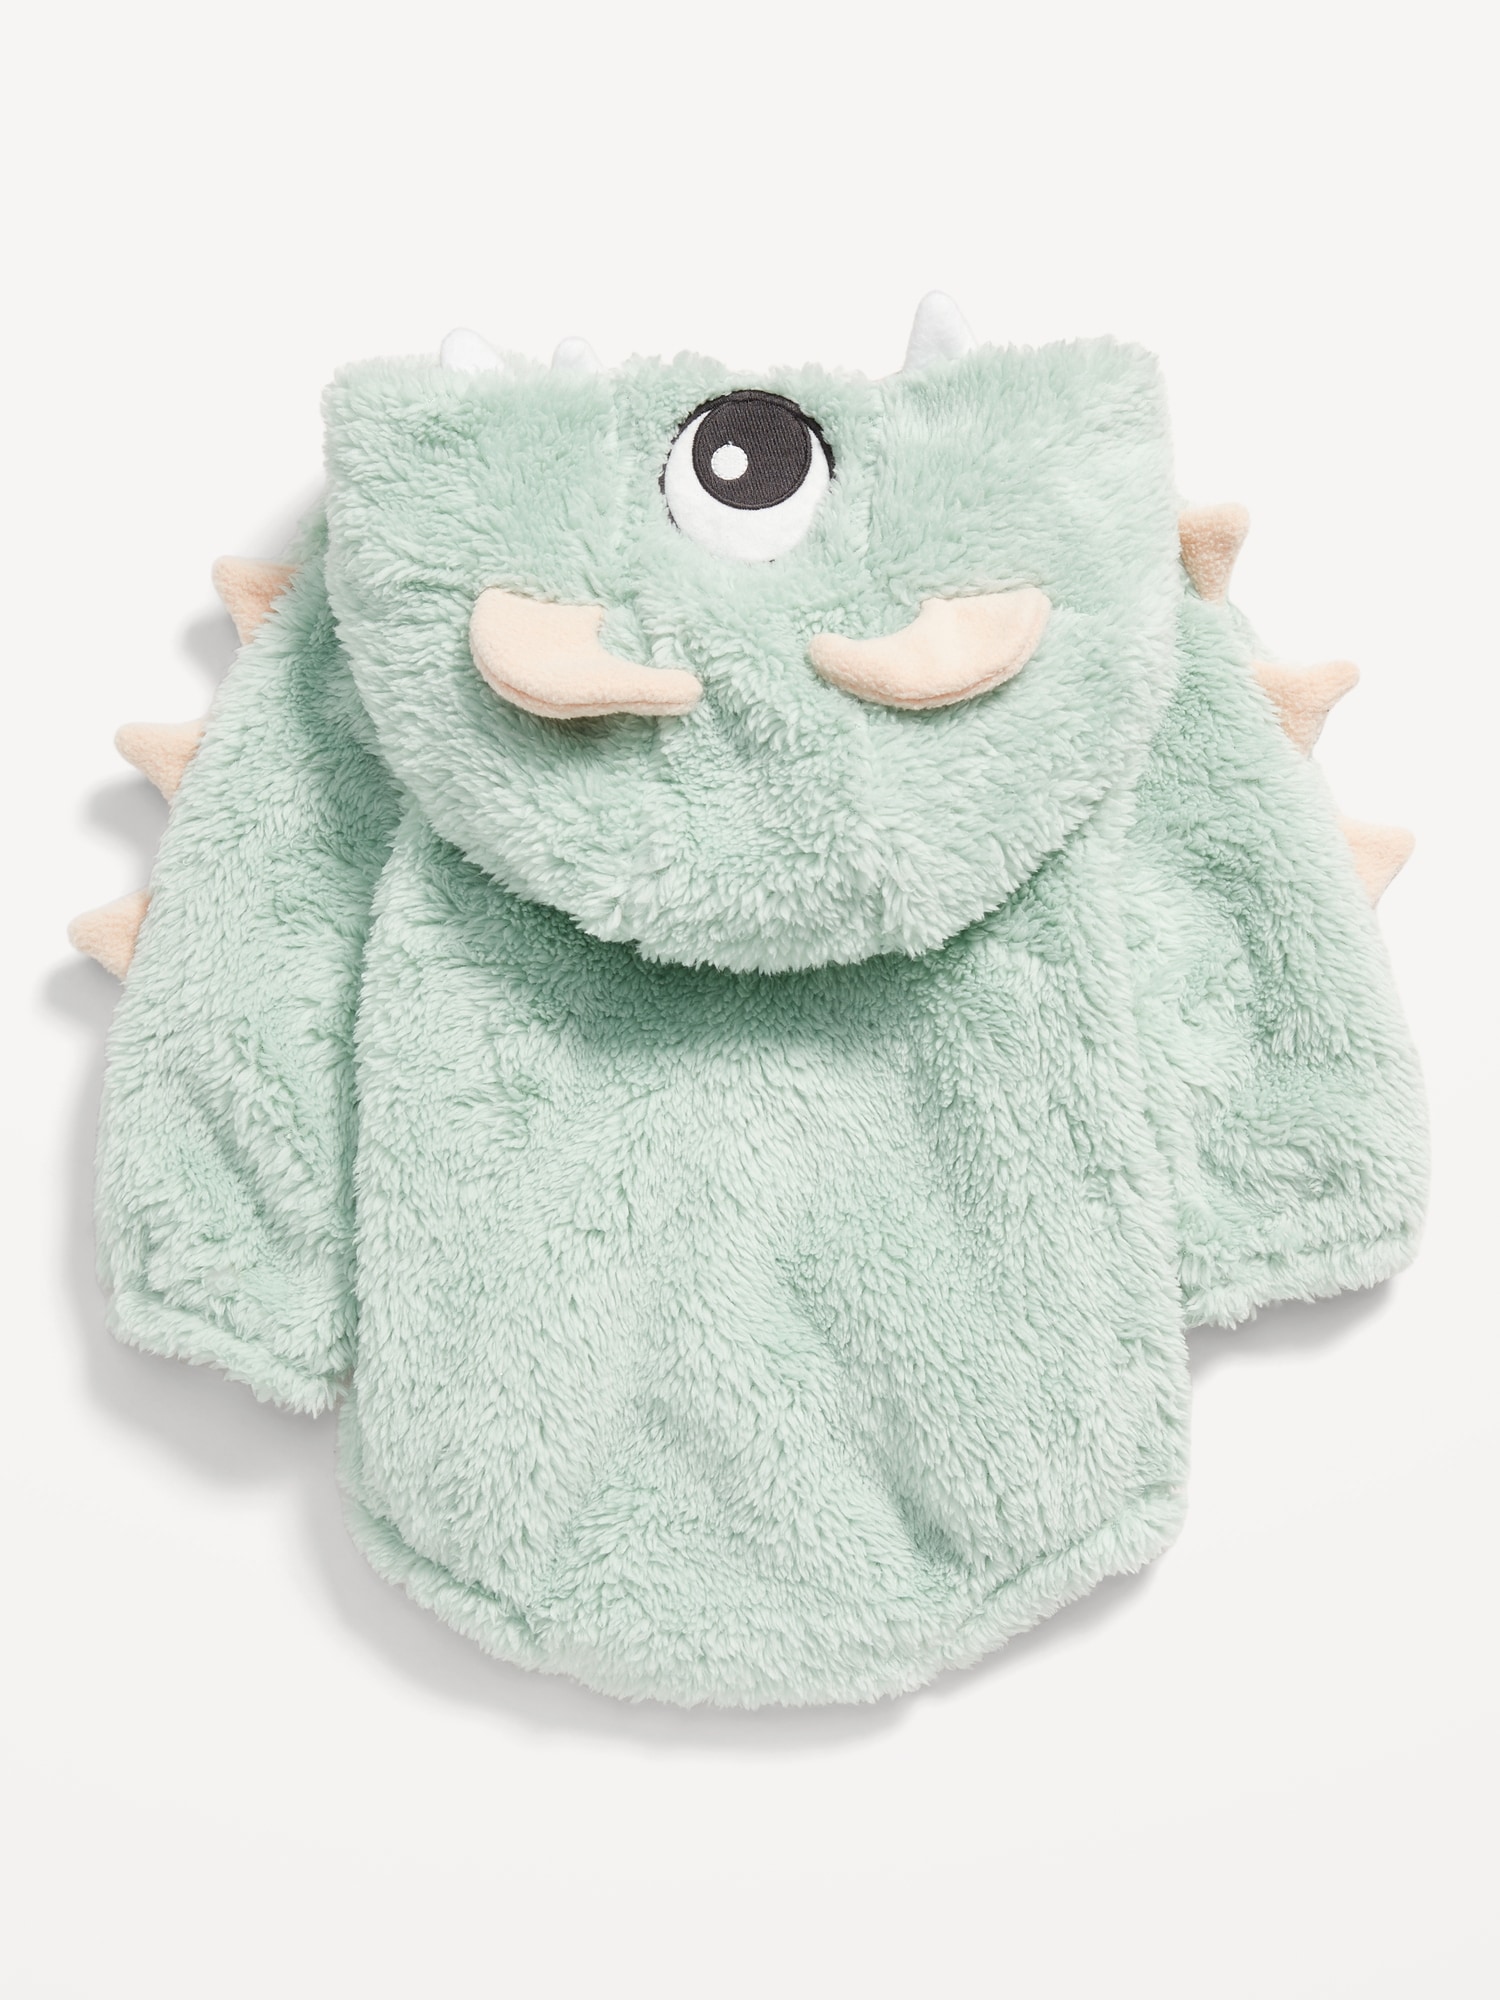 Unisex Monster Costume Hooded One-Piece Romper for Baby | Old Navy